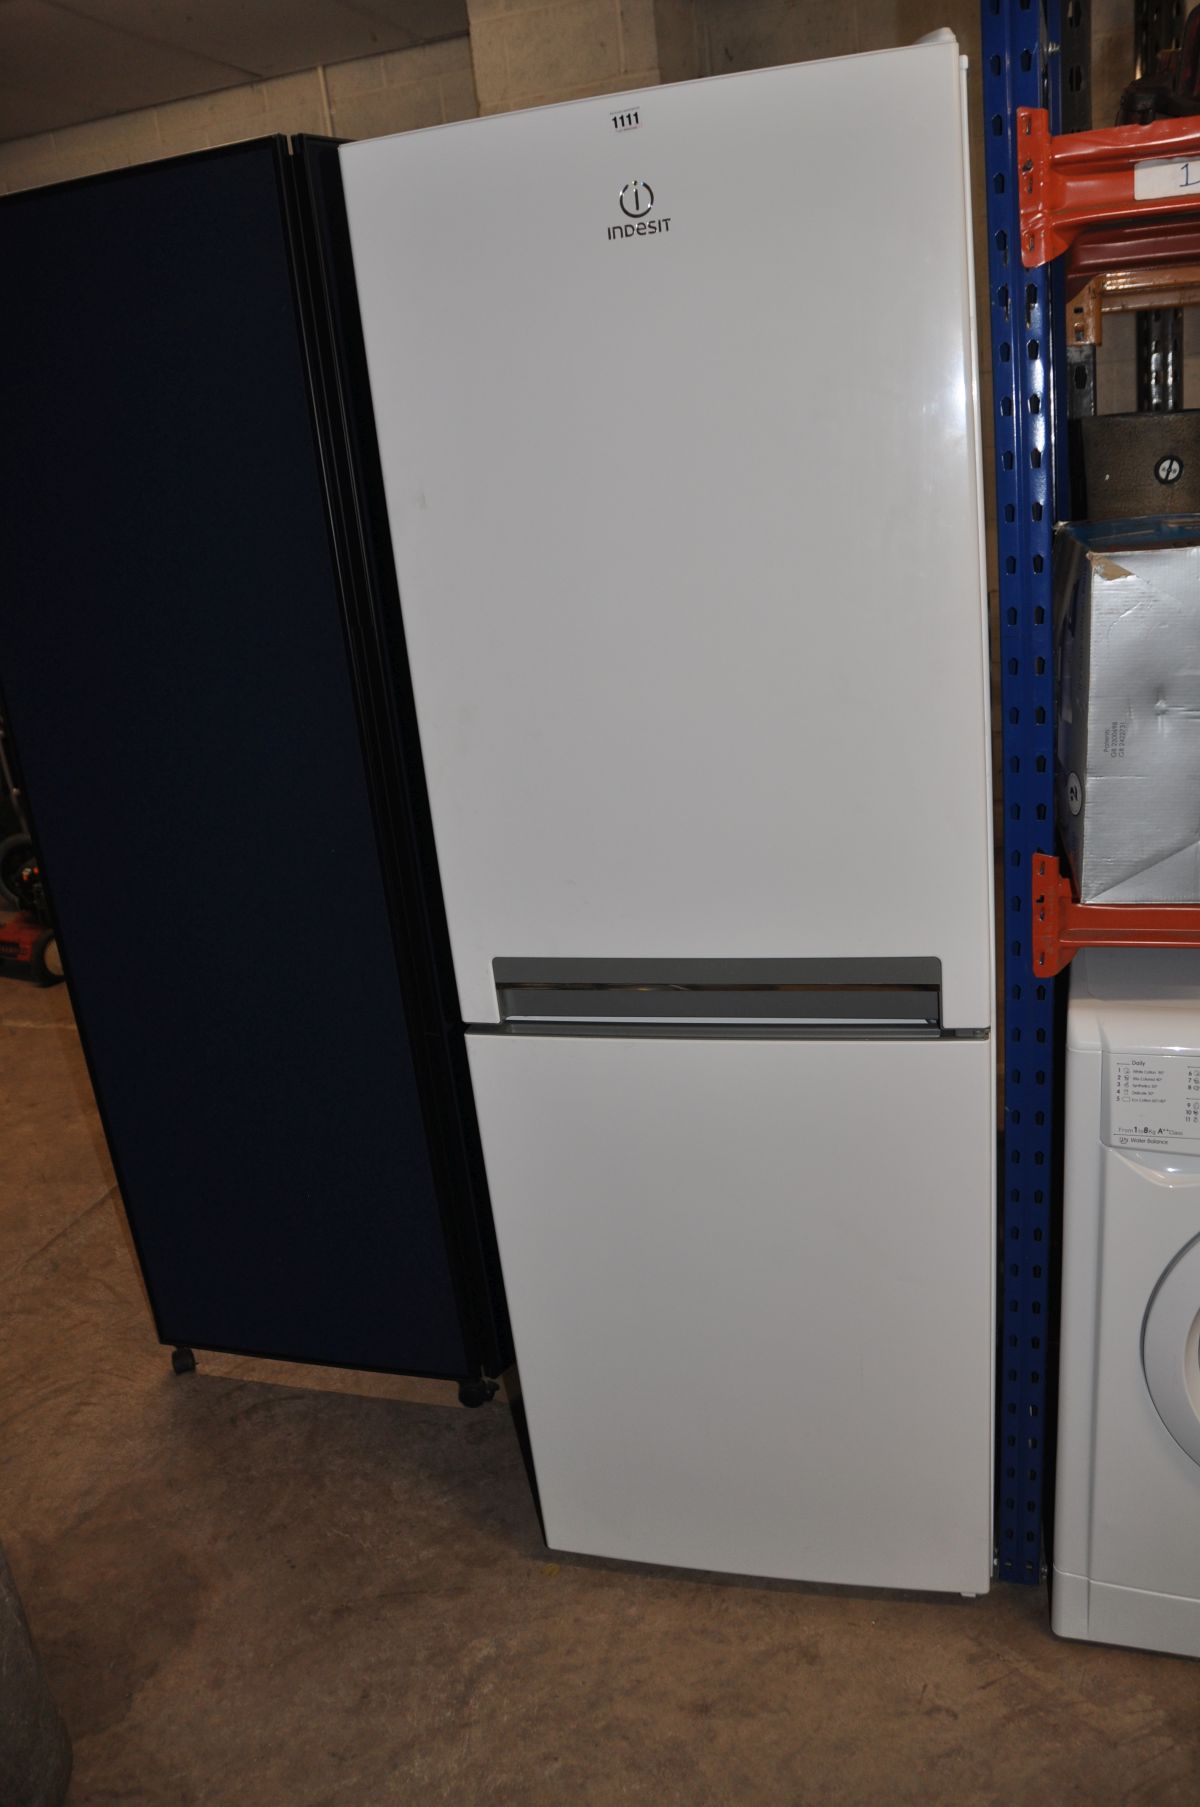 AN INDESIT TALL FRIDGE FREEZER 175cm high (PAT pass and working at 5 and -19 degrees)